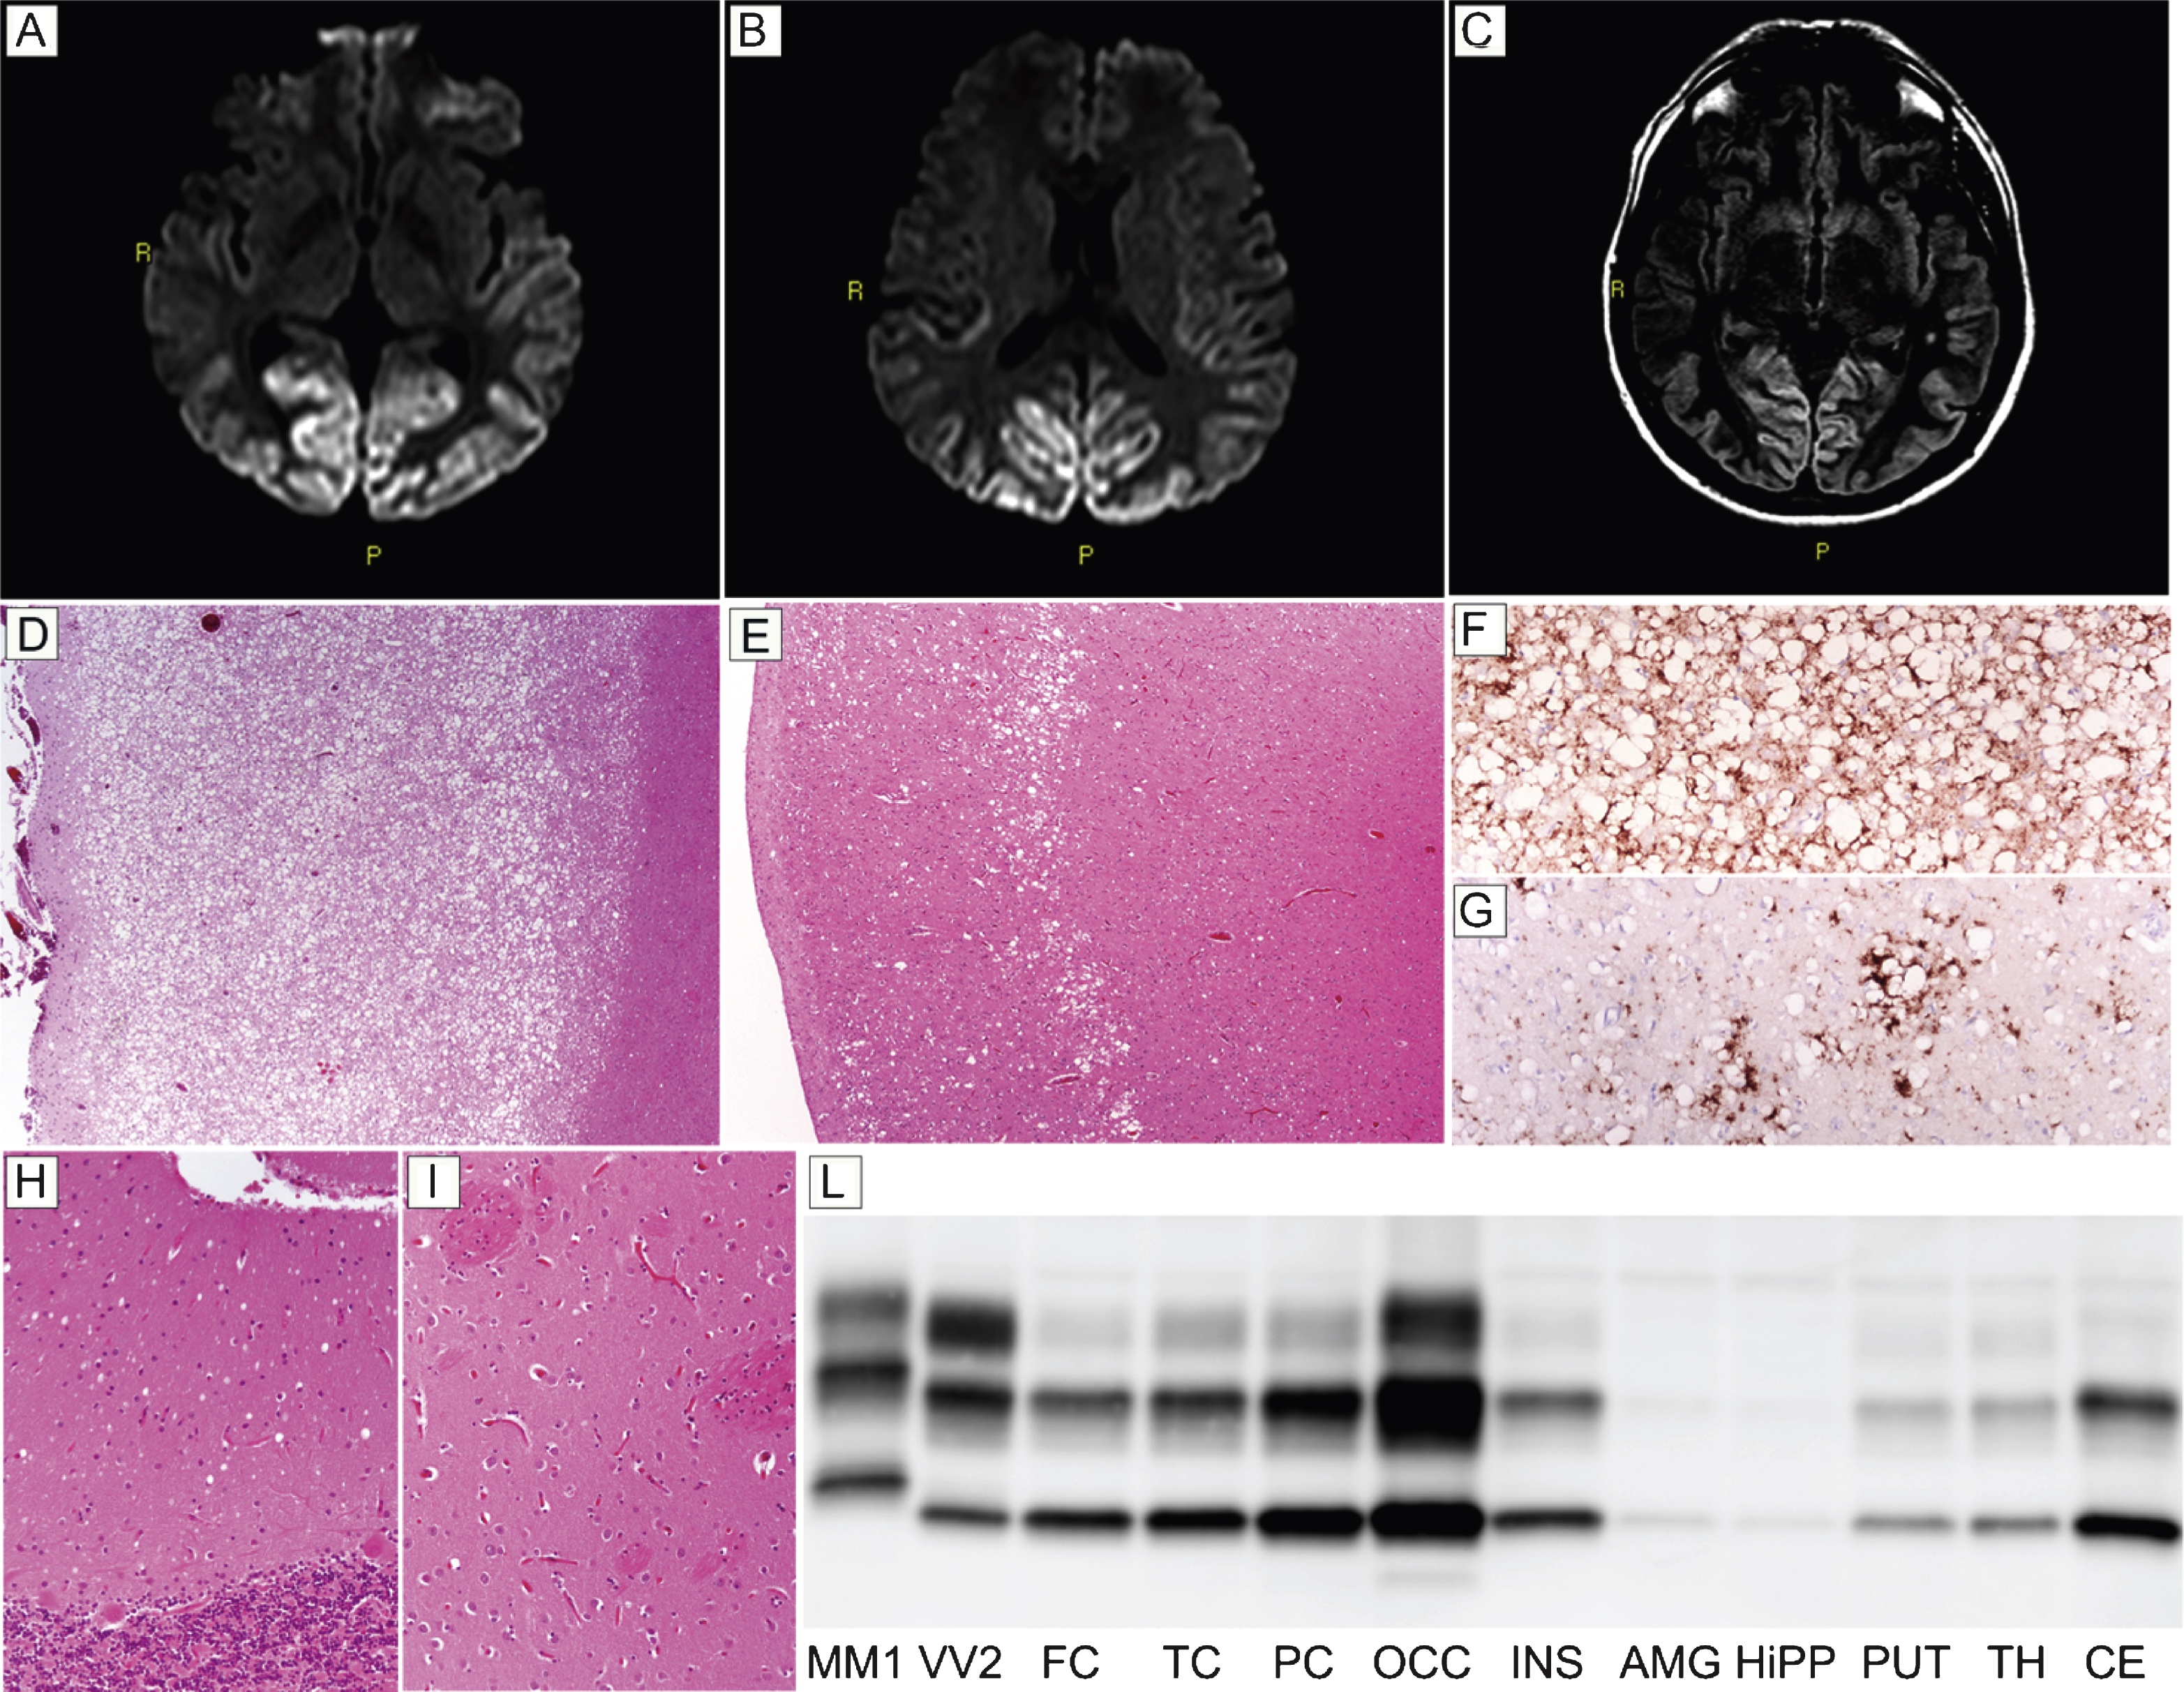 Results of neuroimaging, histopatological, and PrPSc studies in patient #18 (MM 2C). Hyperintensity of occipital cortex in DW- (A and B) and FLAIR- (C) sequences. (D) Spongiform change characterized by large, confluent vacuoles diffusely involving the gray matter (H&E stain, occipital cortex); (E) sparse foci of spongiform change especially involving the middle layers (H&E stain, frontal cortex); (F) perivacuolar pattern of PrP deposition in the occipital cortex; (G) sparse foci of coarse PrP deposits in the frontal cortex; (H) mild spongiform changes characterized by small vacuoles in the cerebellum (H&E stain); (I) lack of significant spongiform change in the putamen (H&E stain). Pictures (D-I) in the panel have the same magnification (×100). (L) PrPSc typing by western blotting revealing a type 2 pattern of electrophoretic mobility in all regions; PrPSc is overall more abundant in the cerebral cortex (especially in occipital cortex) than in subcortical areas where only traces or a relatively low amount of the abnormal protein are detected.